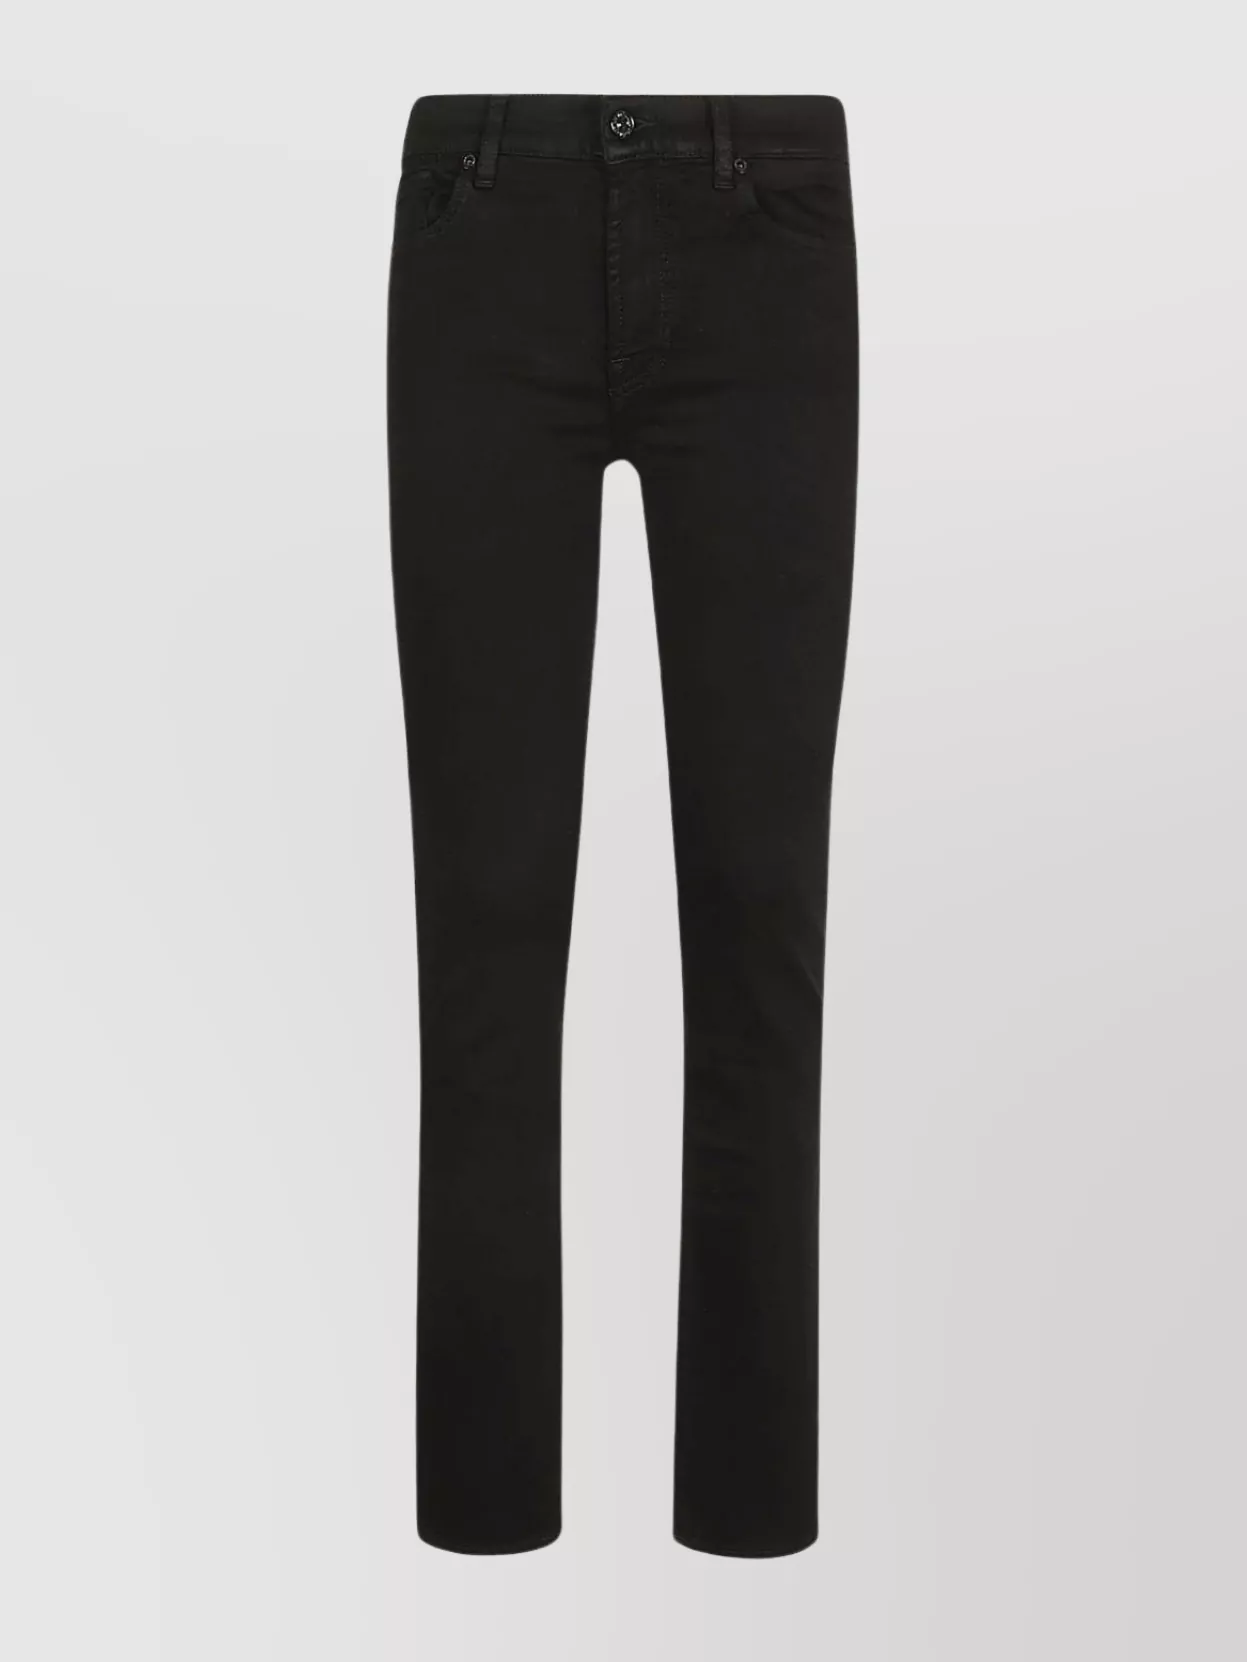 Shop 7 For All Mankind Roxanne Bair Trousers Featuring Back Pockets